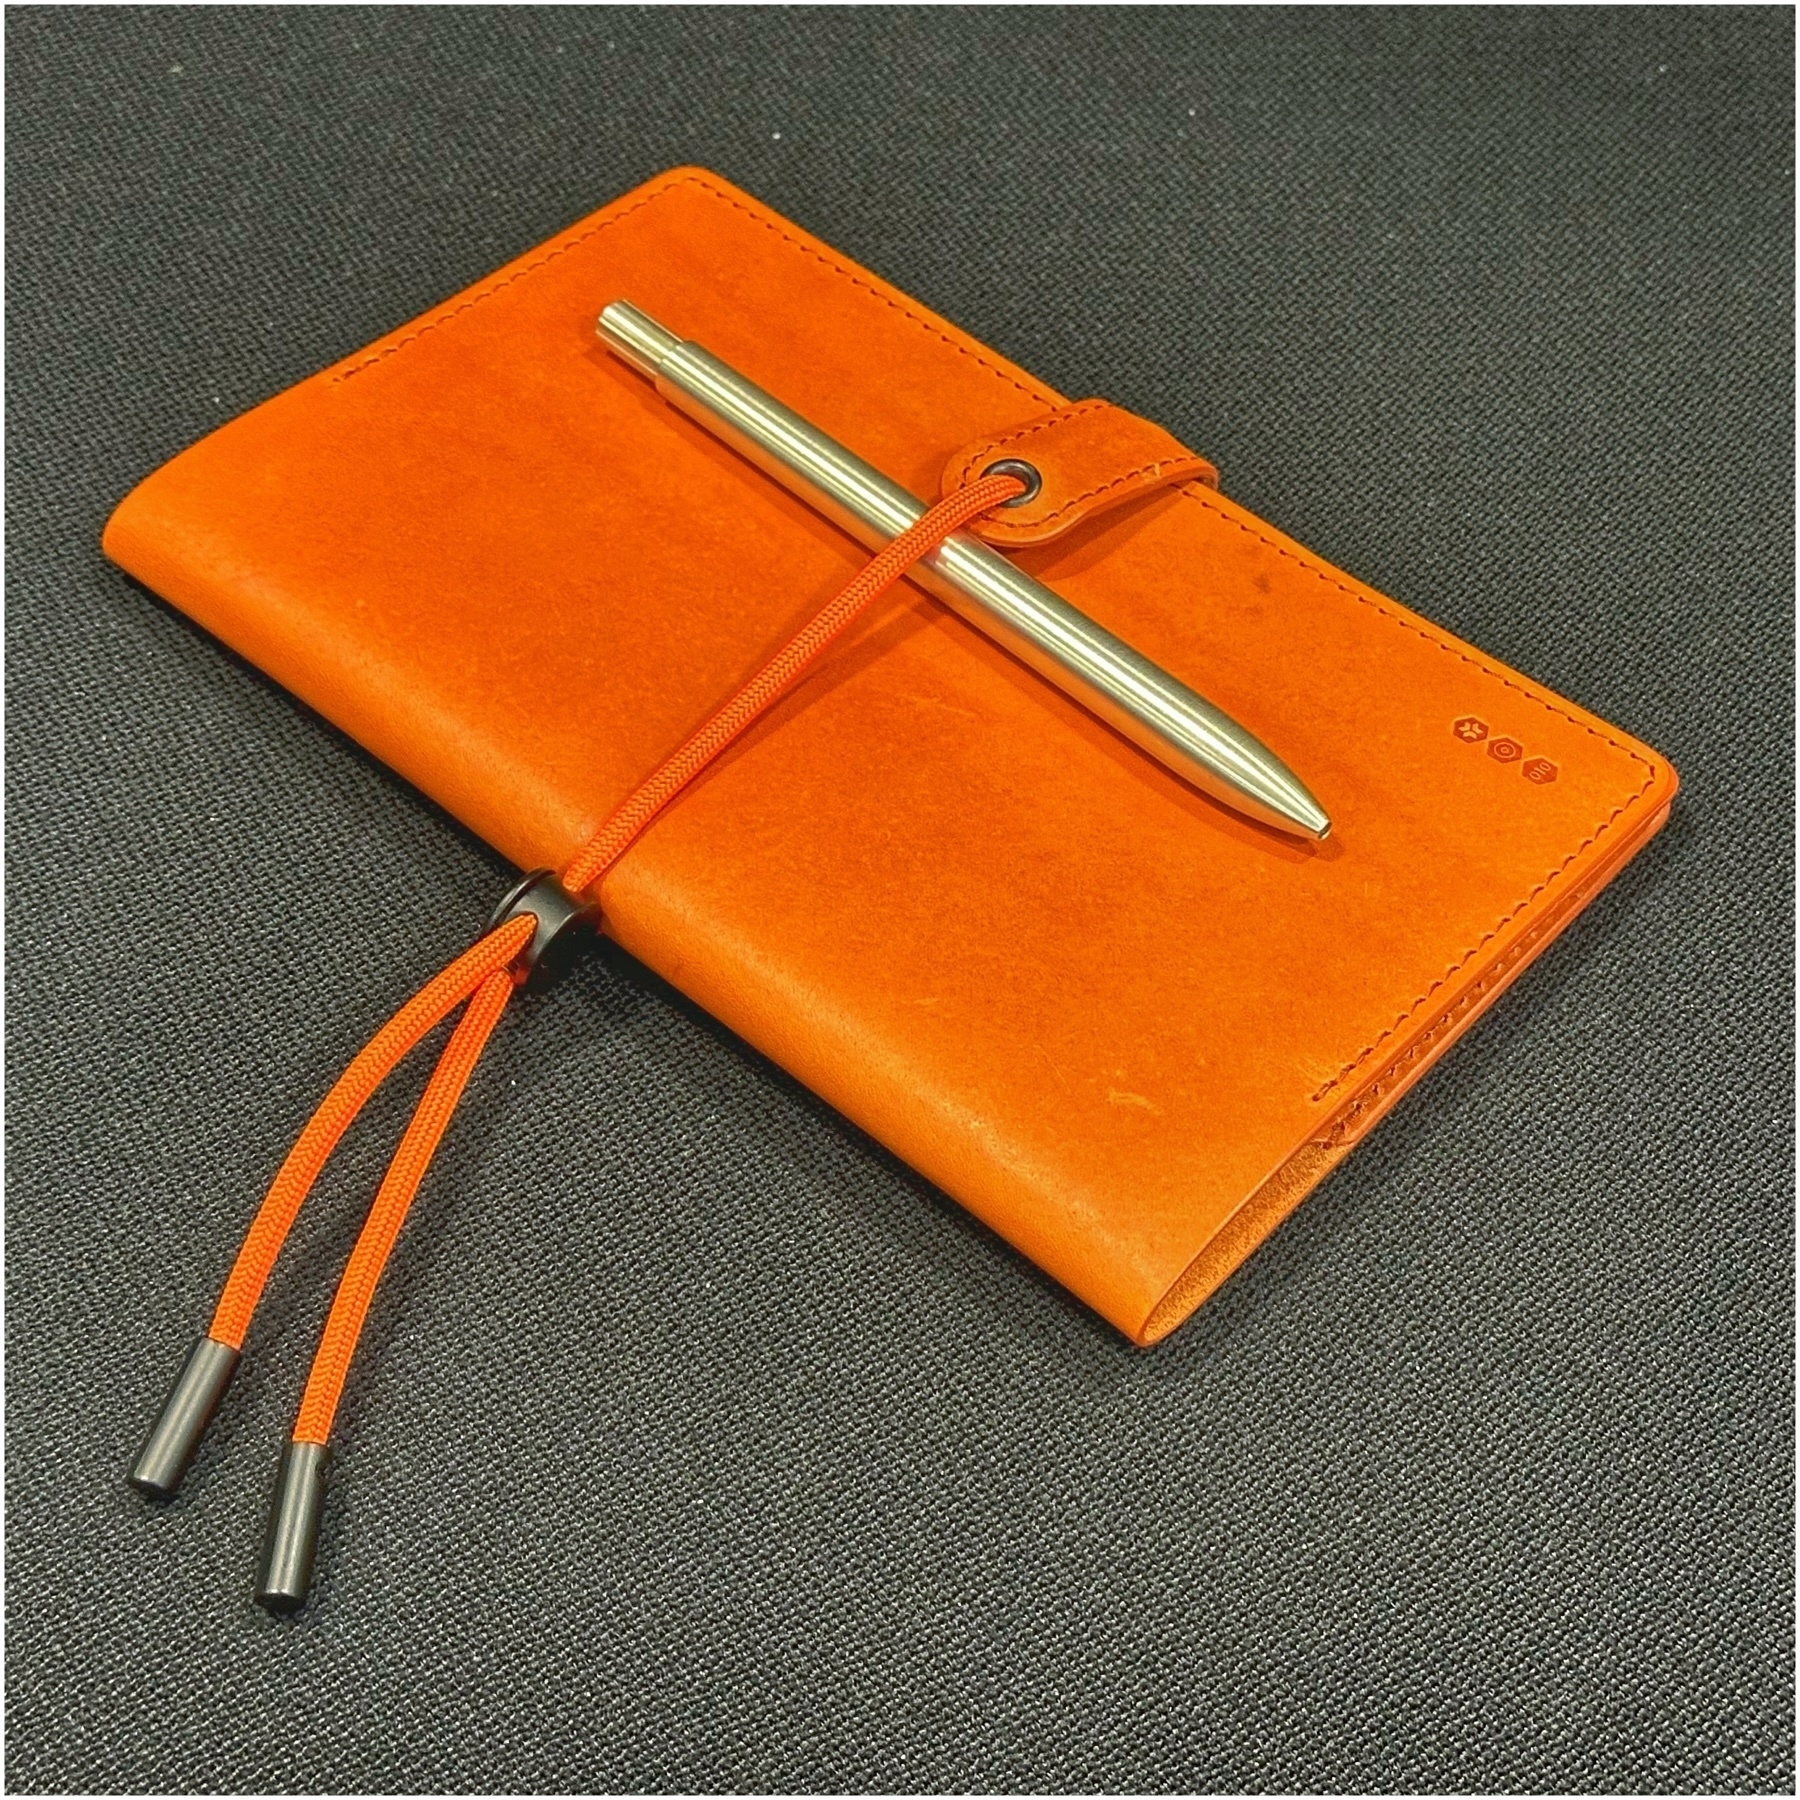 Orange journal with an elastic closure and a silver pen resting on top, placed on a dark textured surface.